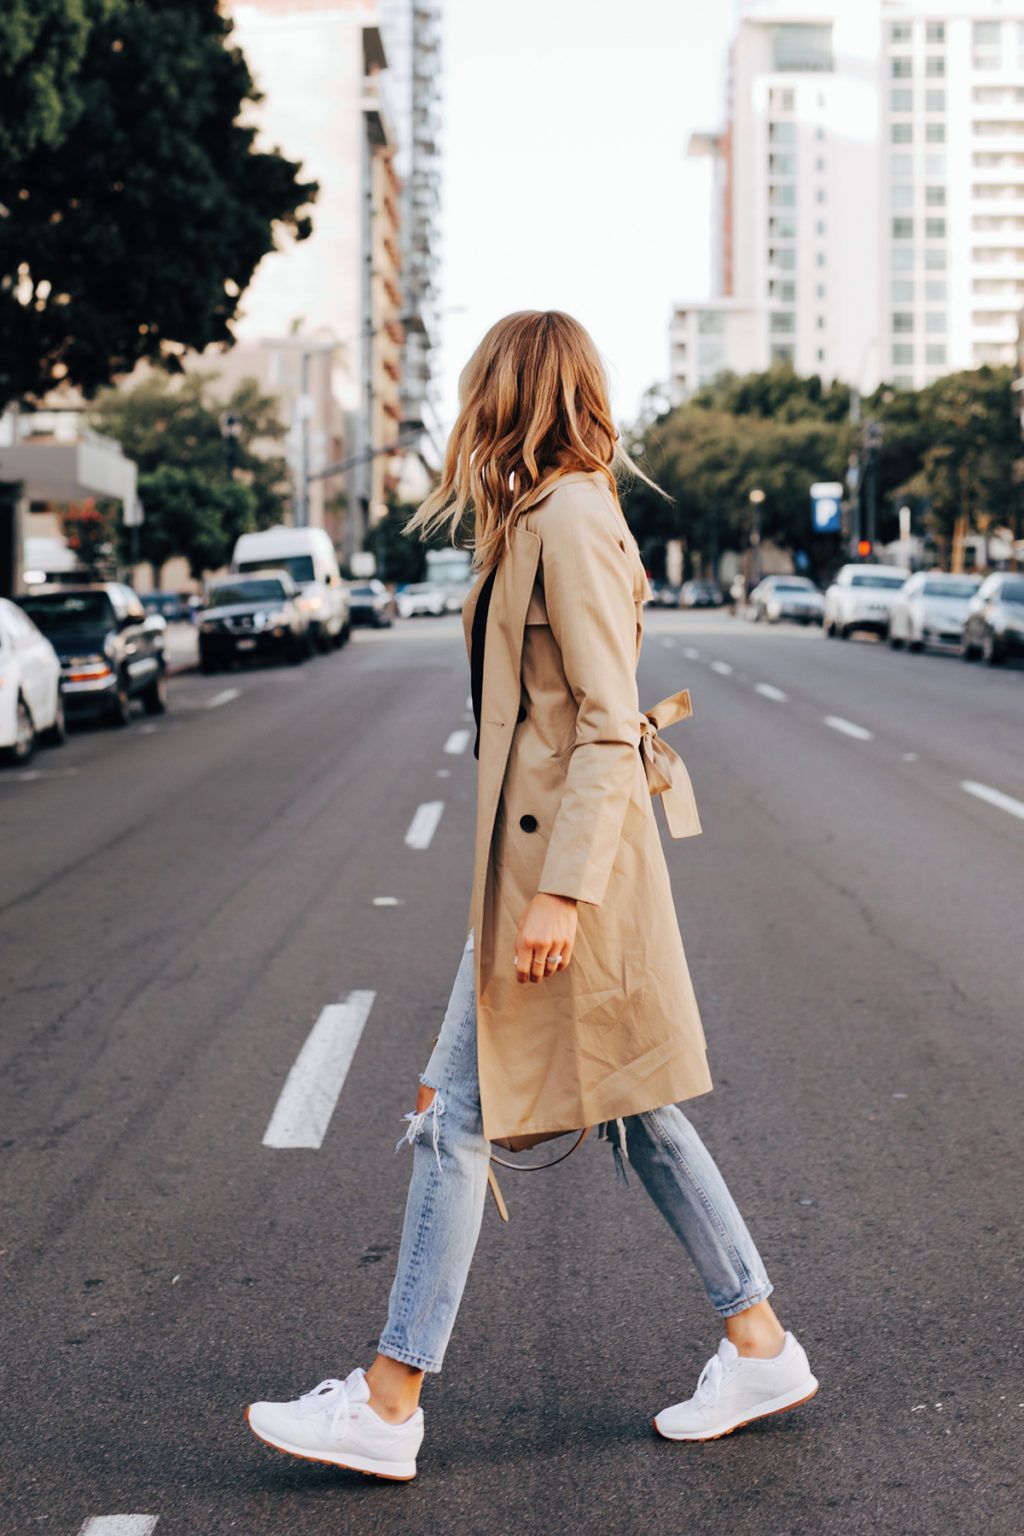 Stay Chic and Sophisticated with a Trench
Coat Outfit: Timeless Elegance for Every Occasion